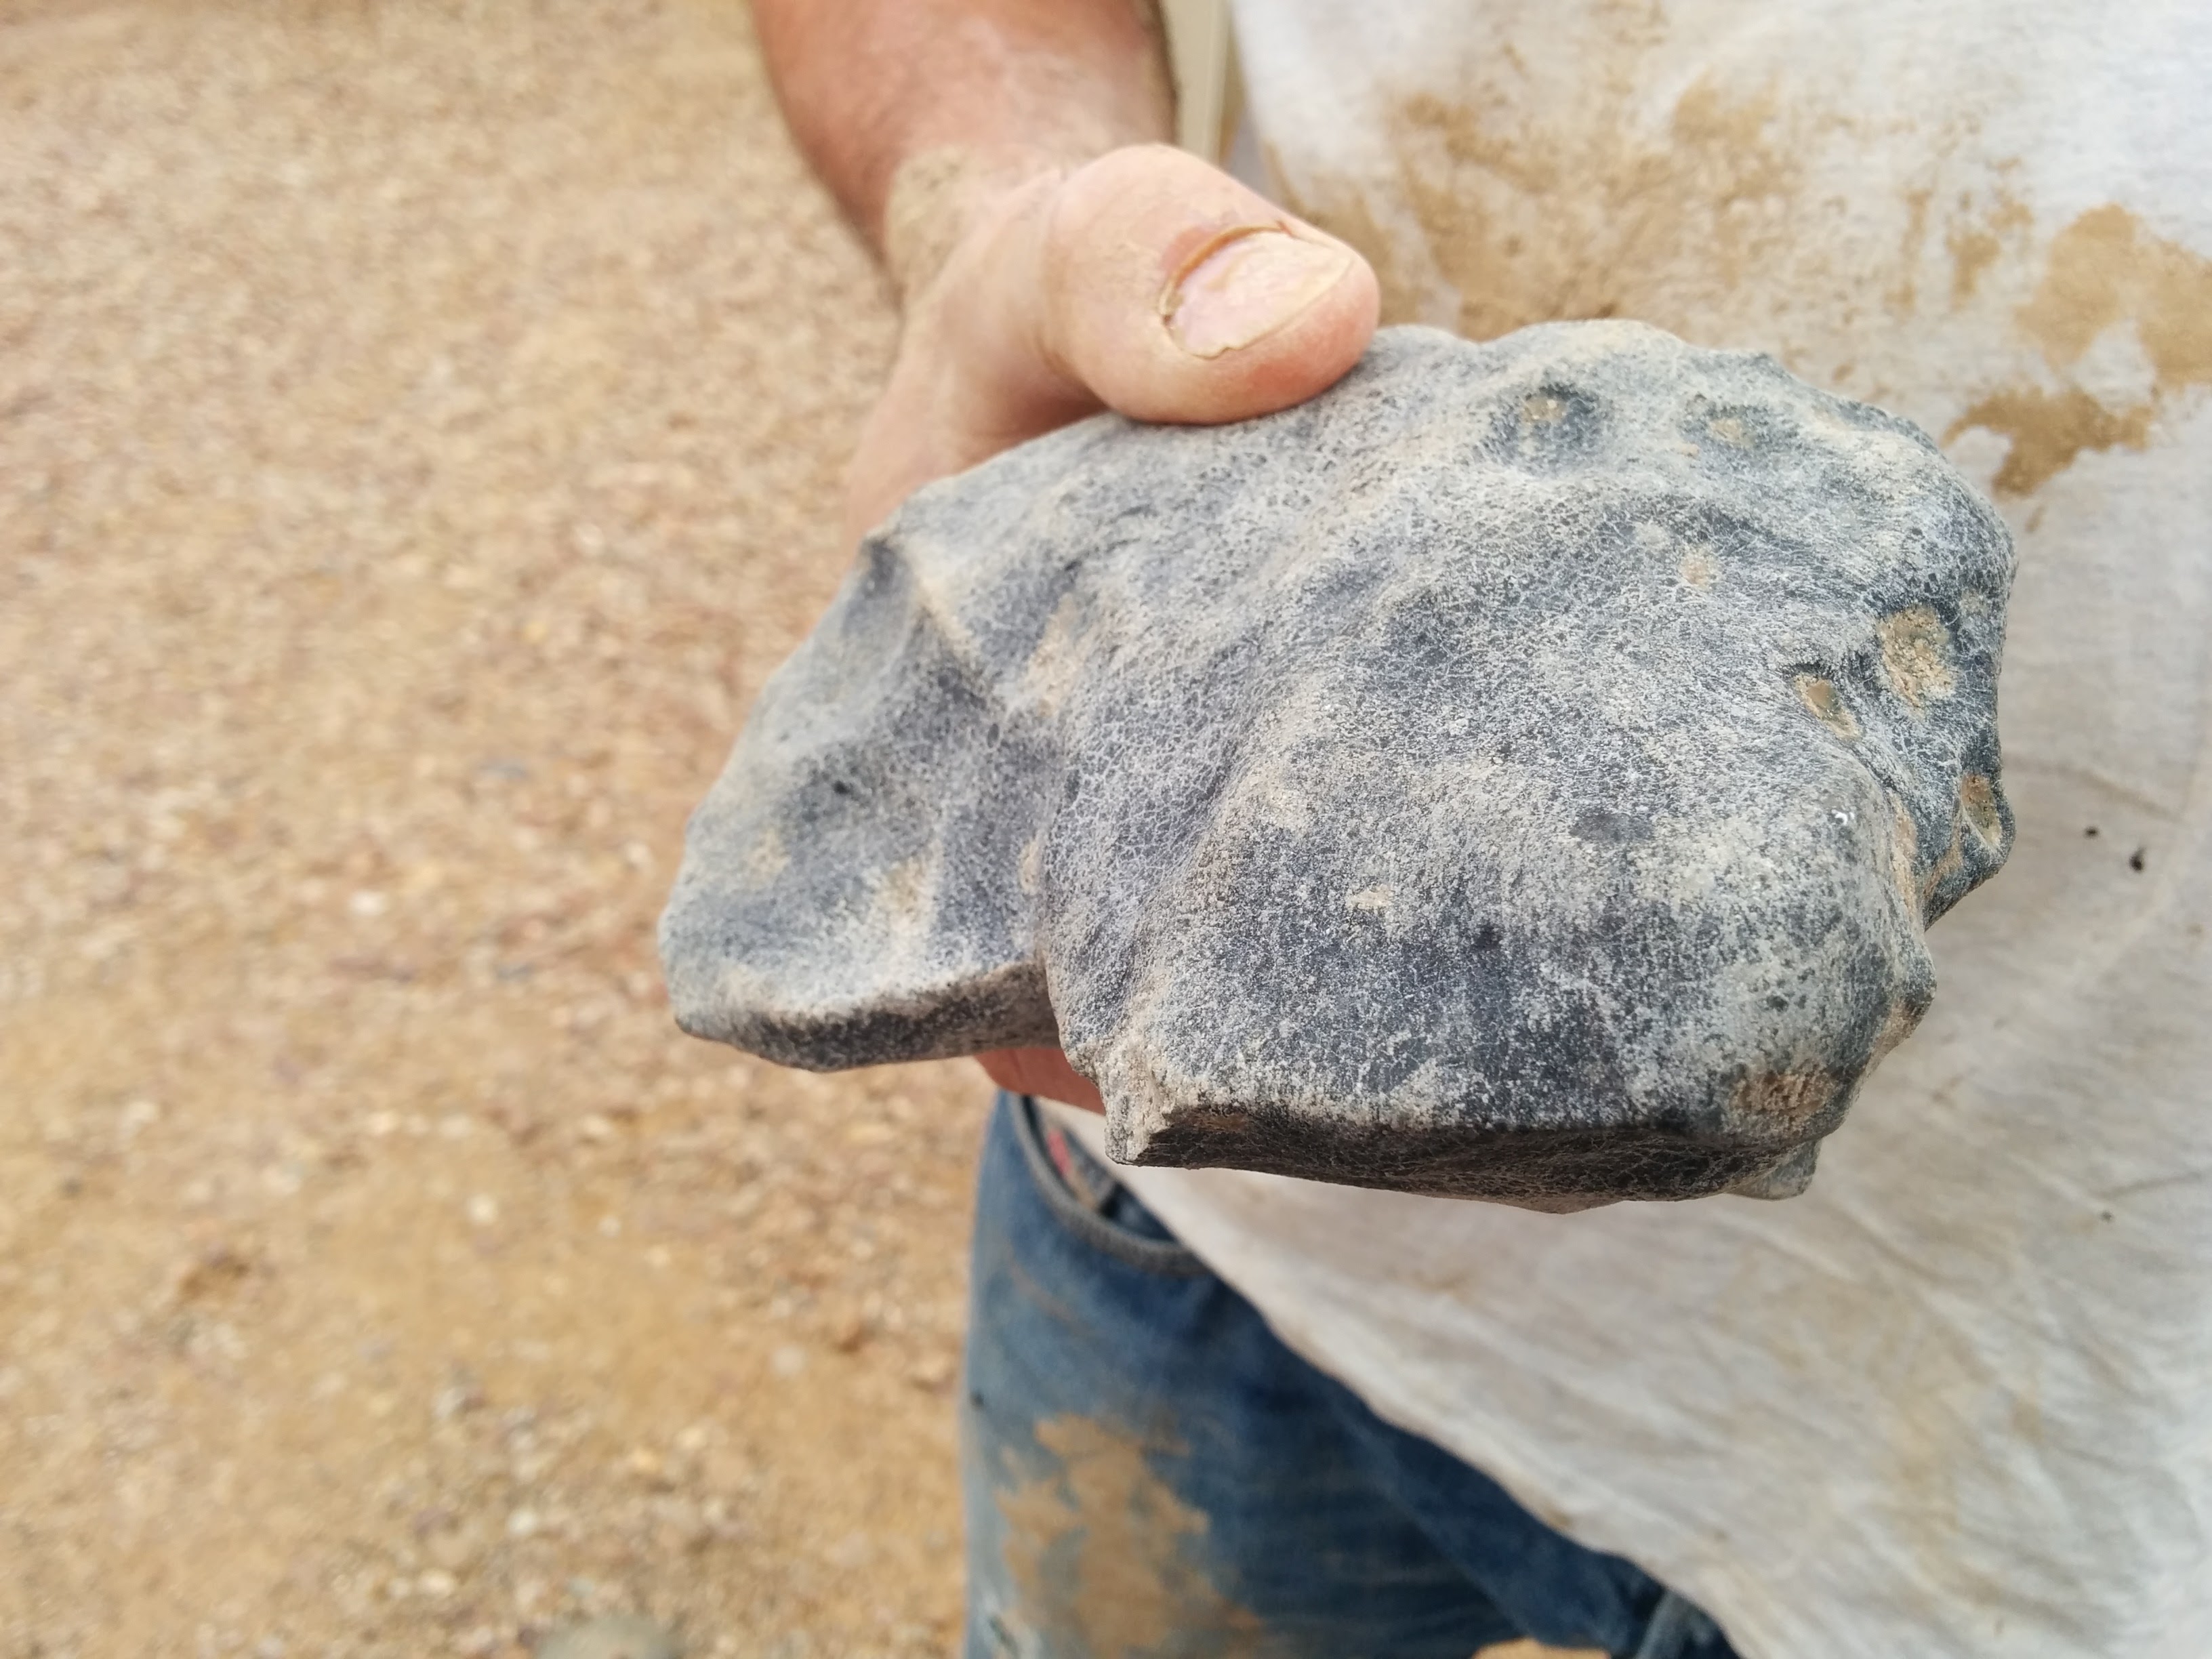 The found chondrite just after the excavation / photo: DFN